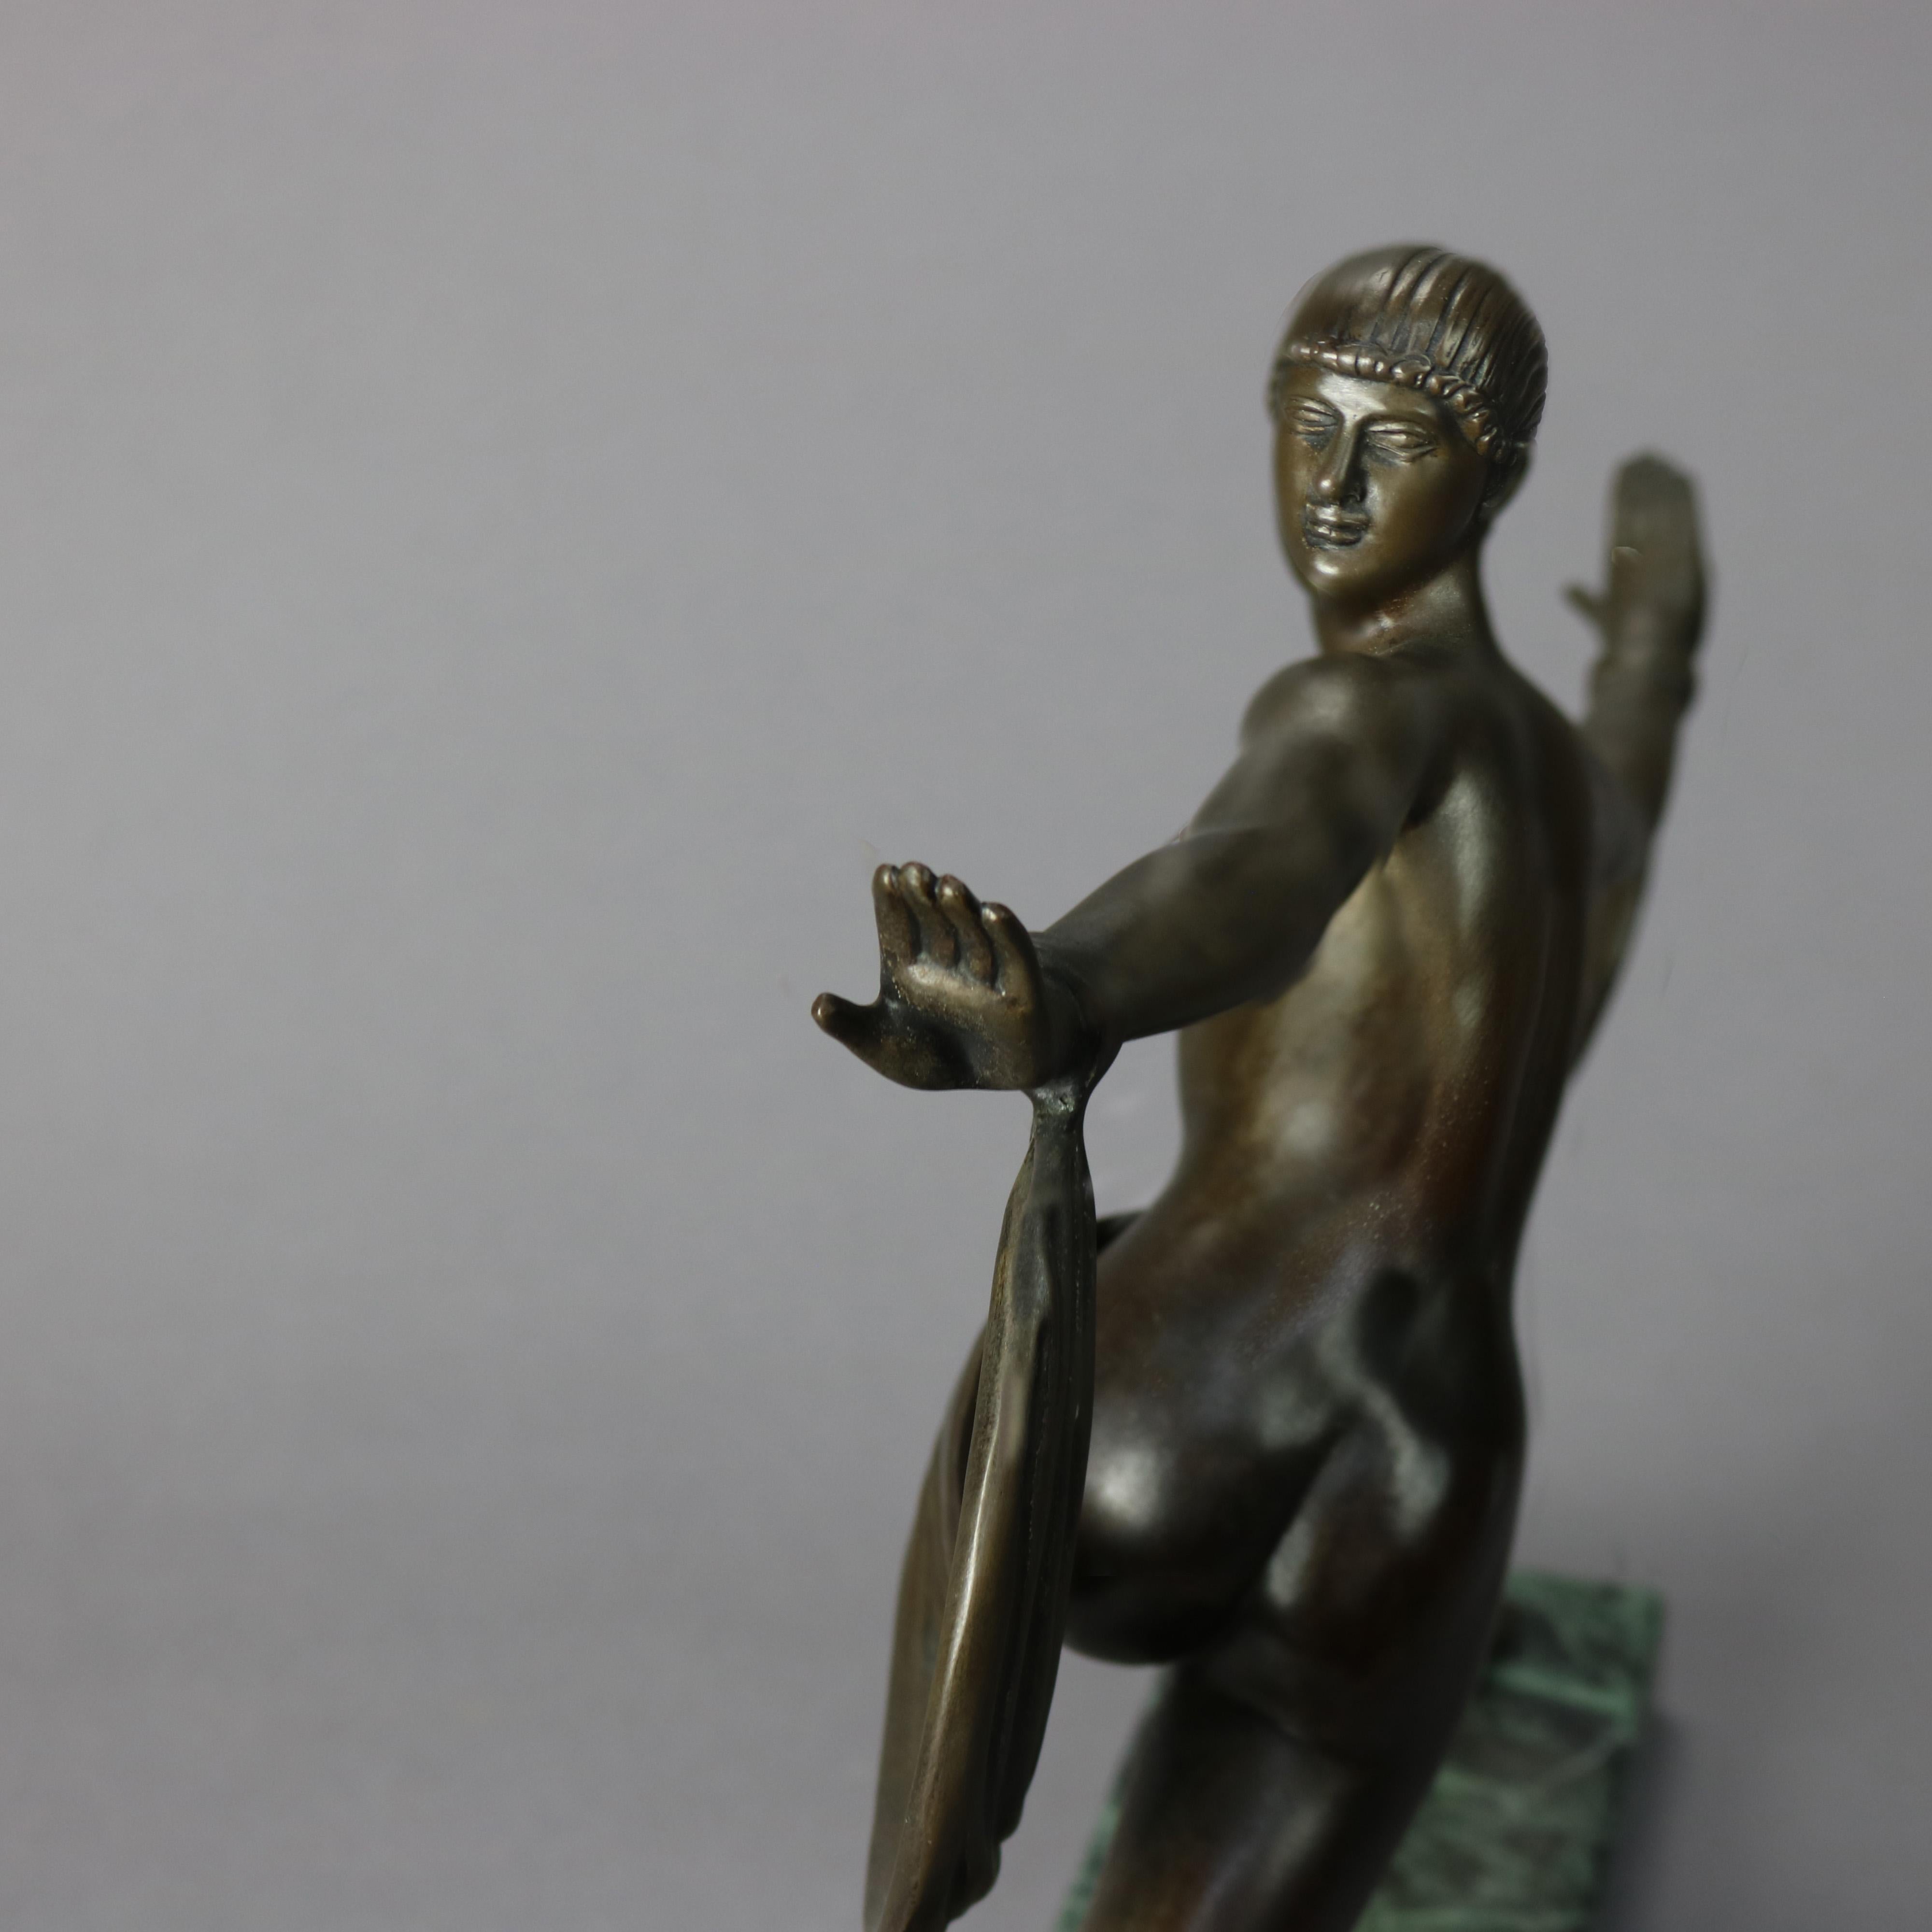 Antique French Art Deco Sculpture Statue of a Woman On Marble Plinth, 20th C. For Sale 5